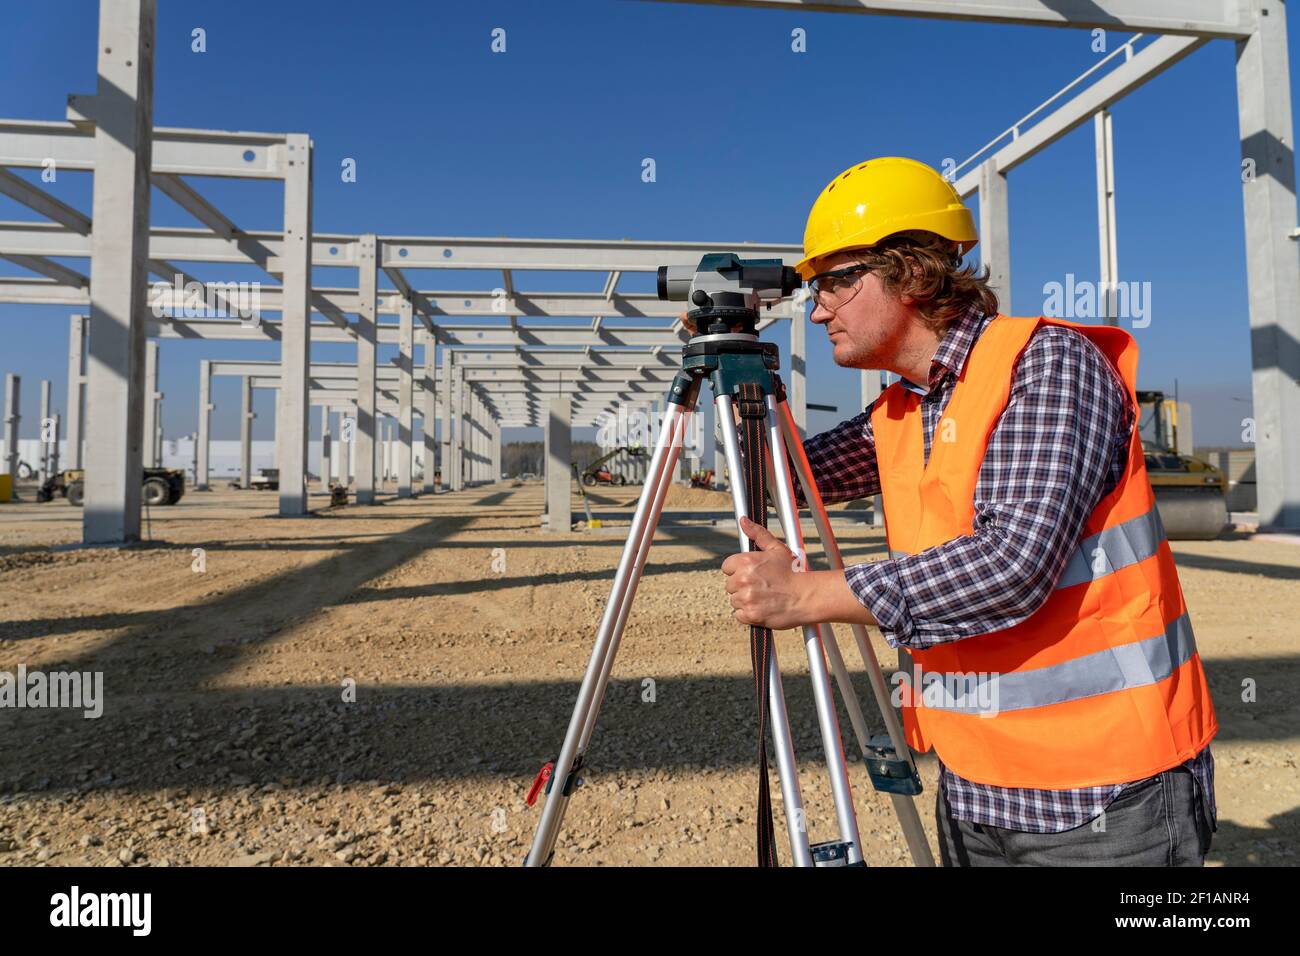 Construction Worker in Yellow Hardhat in front of Industrial Building Under Construction. Construction Worker With Tachometer on Site Under Construct Stock Photo